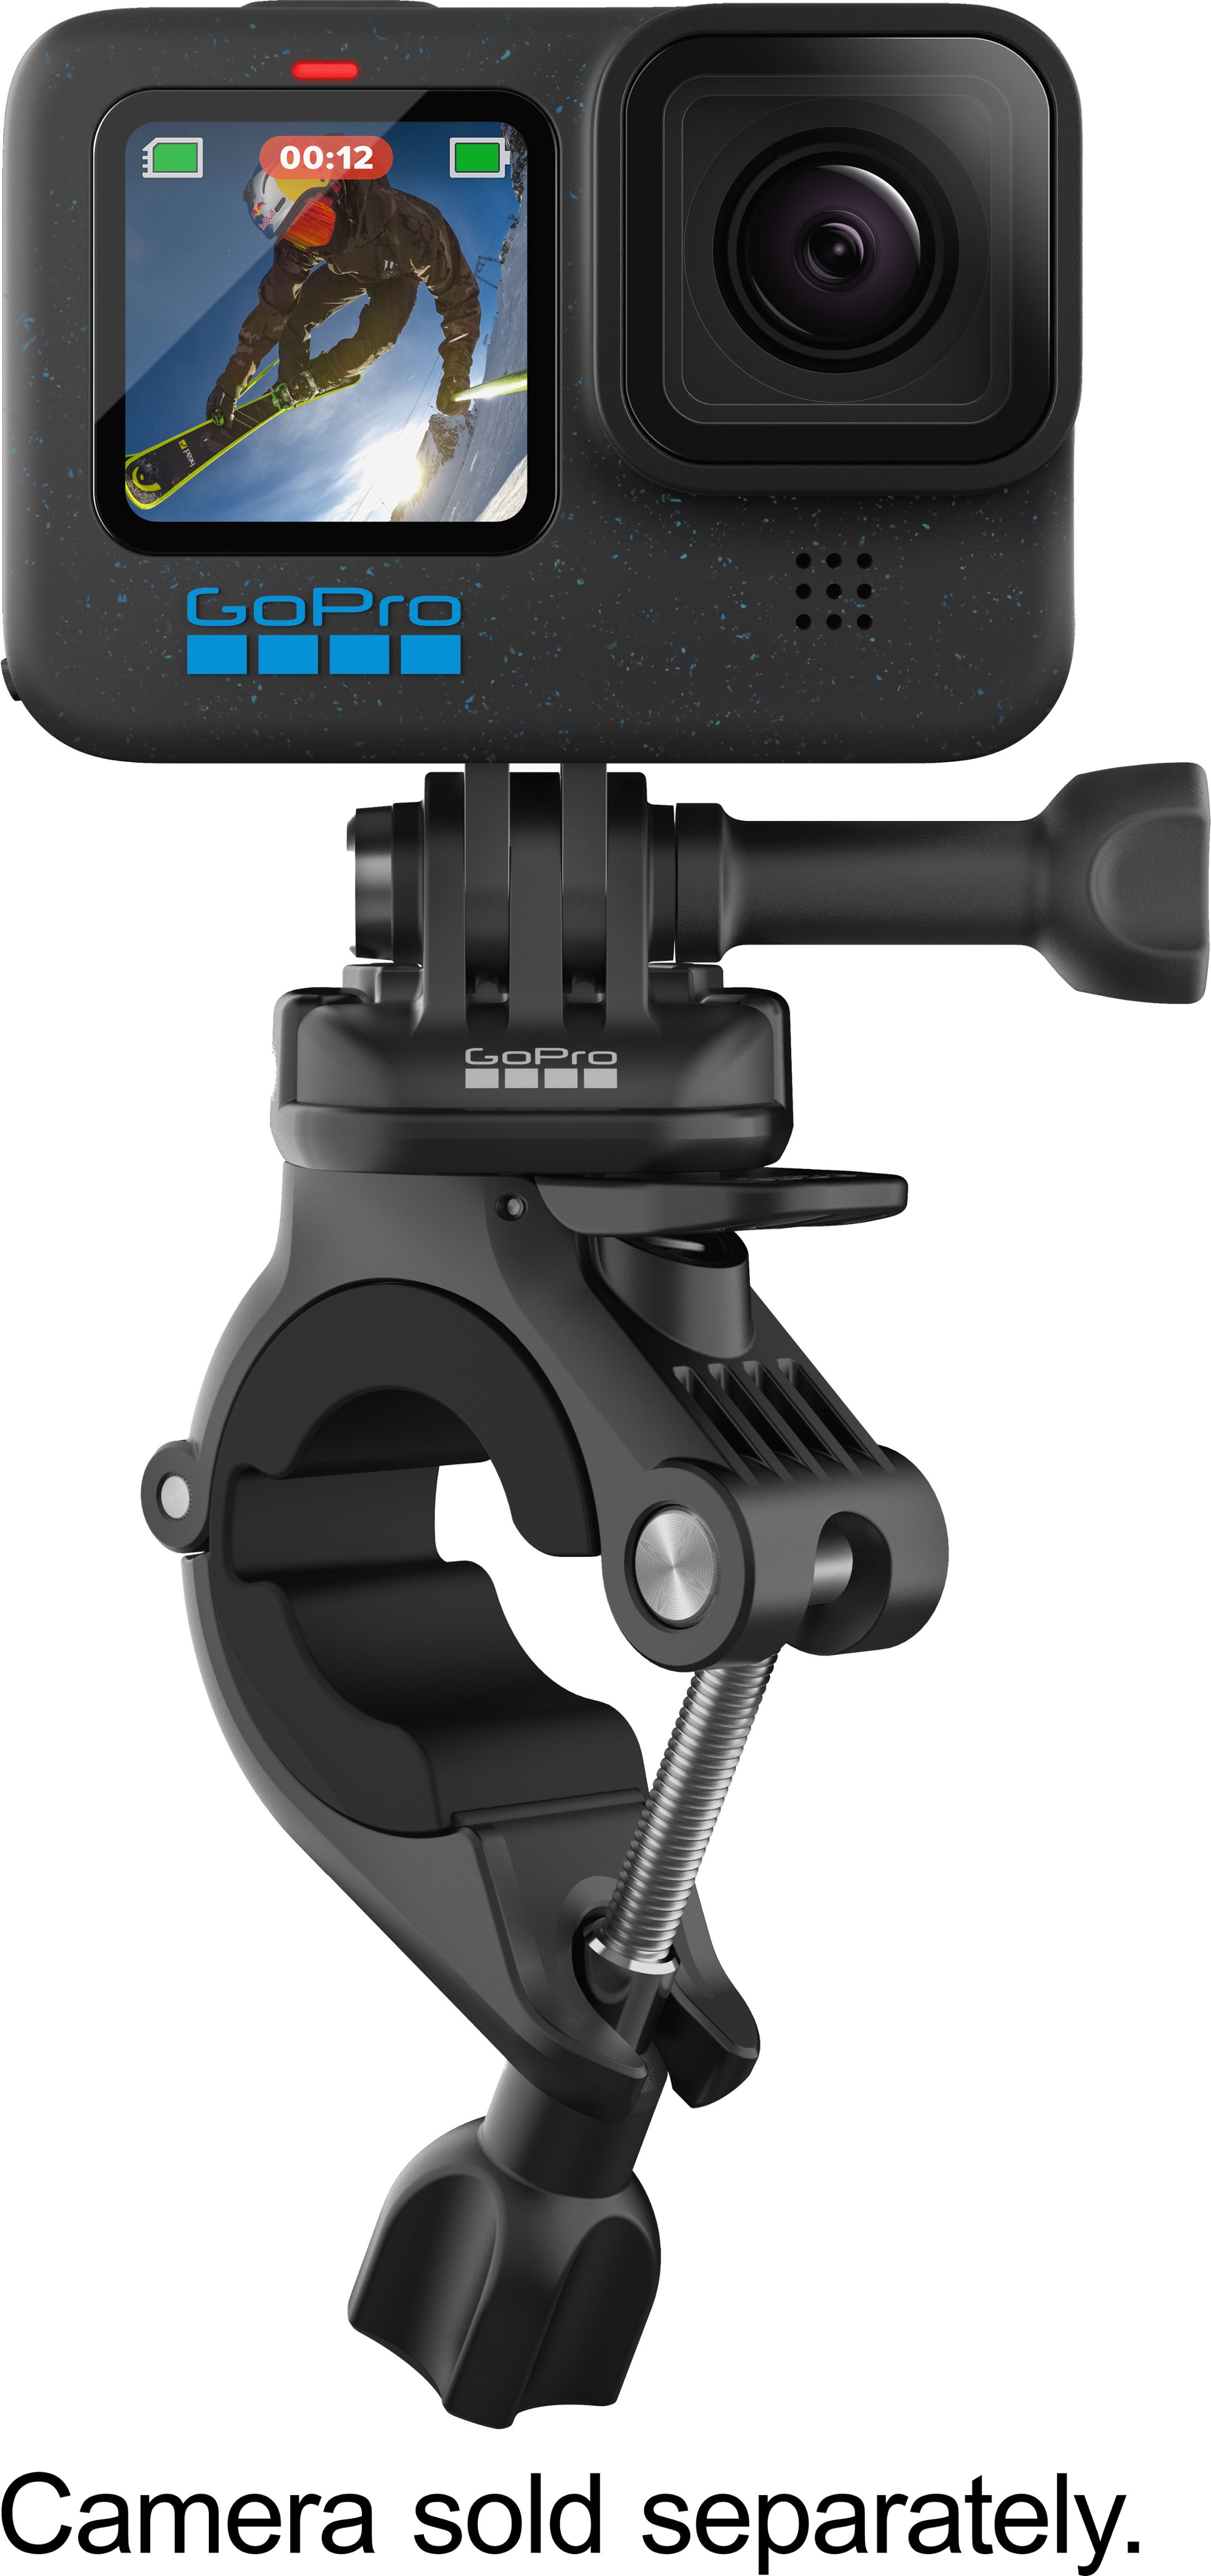 Handlebar / Seatpost / Pole Mount for all GoPro Cameras